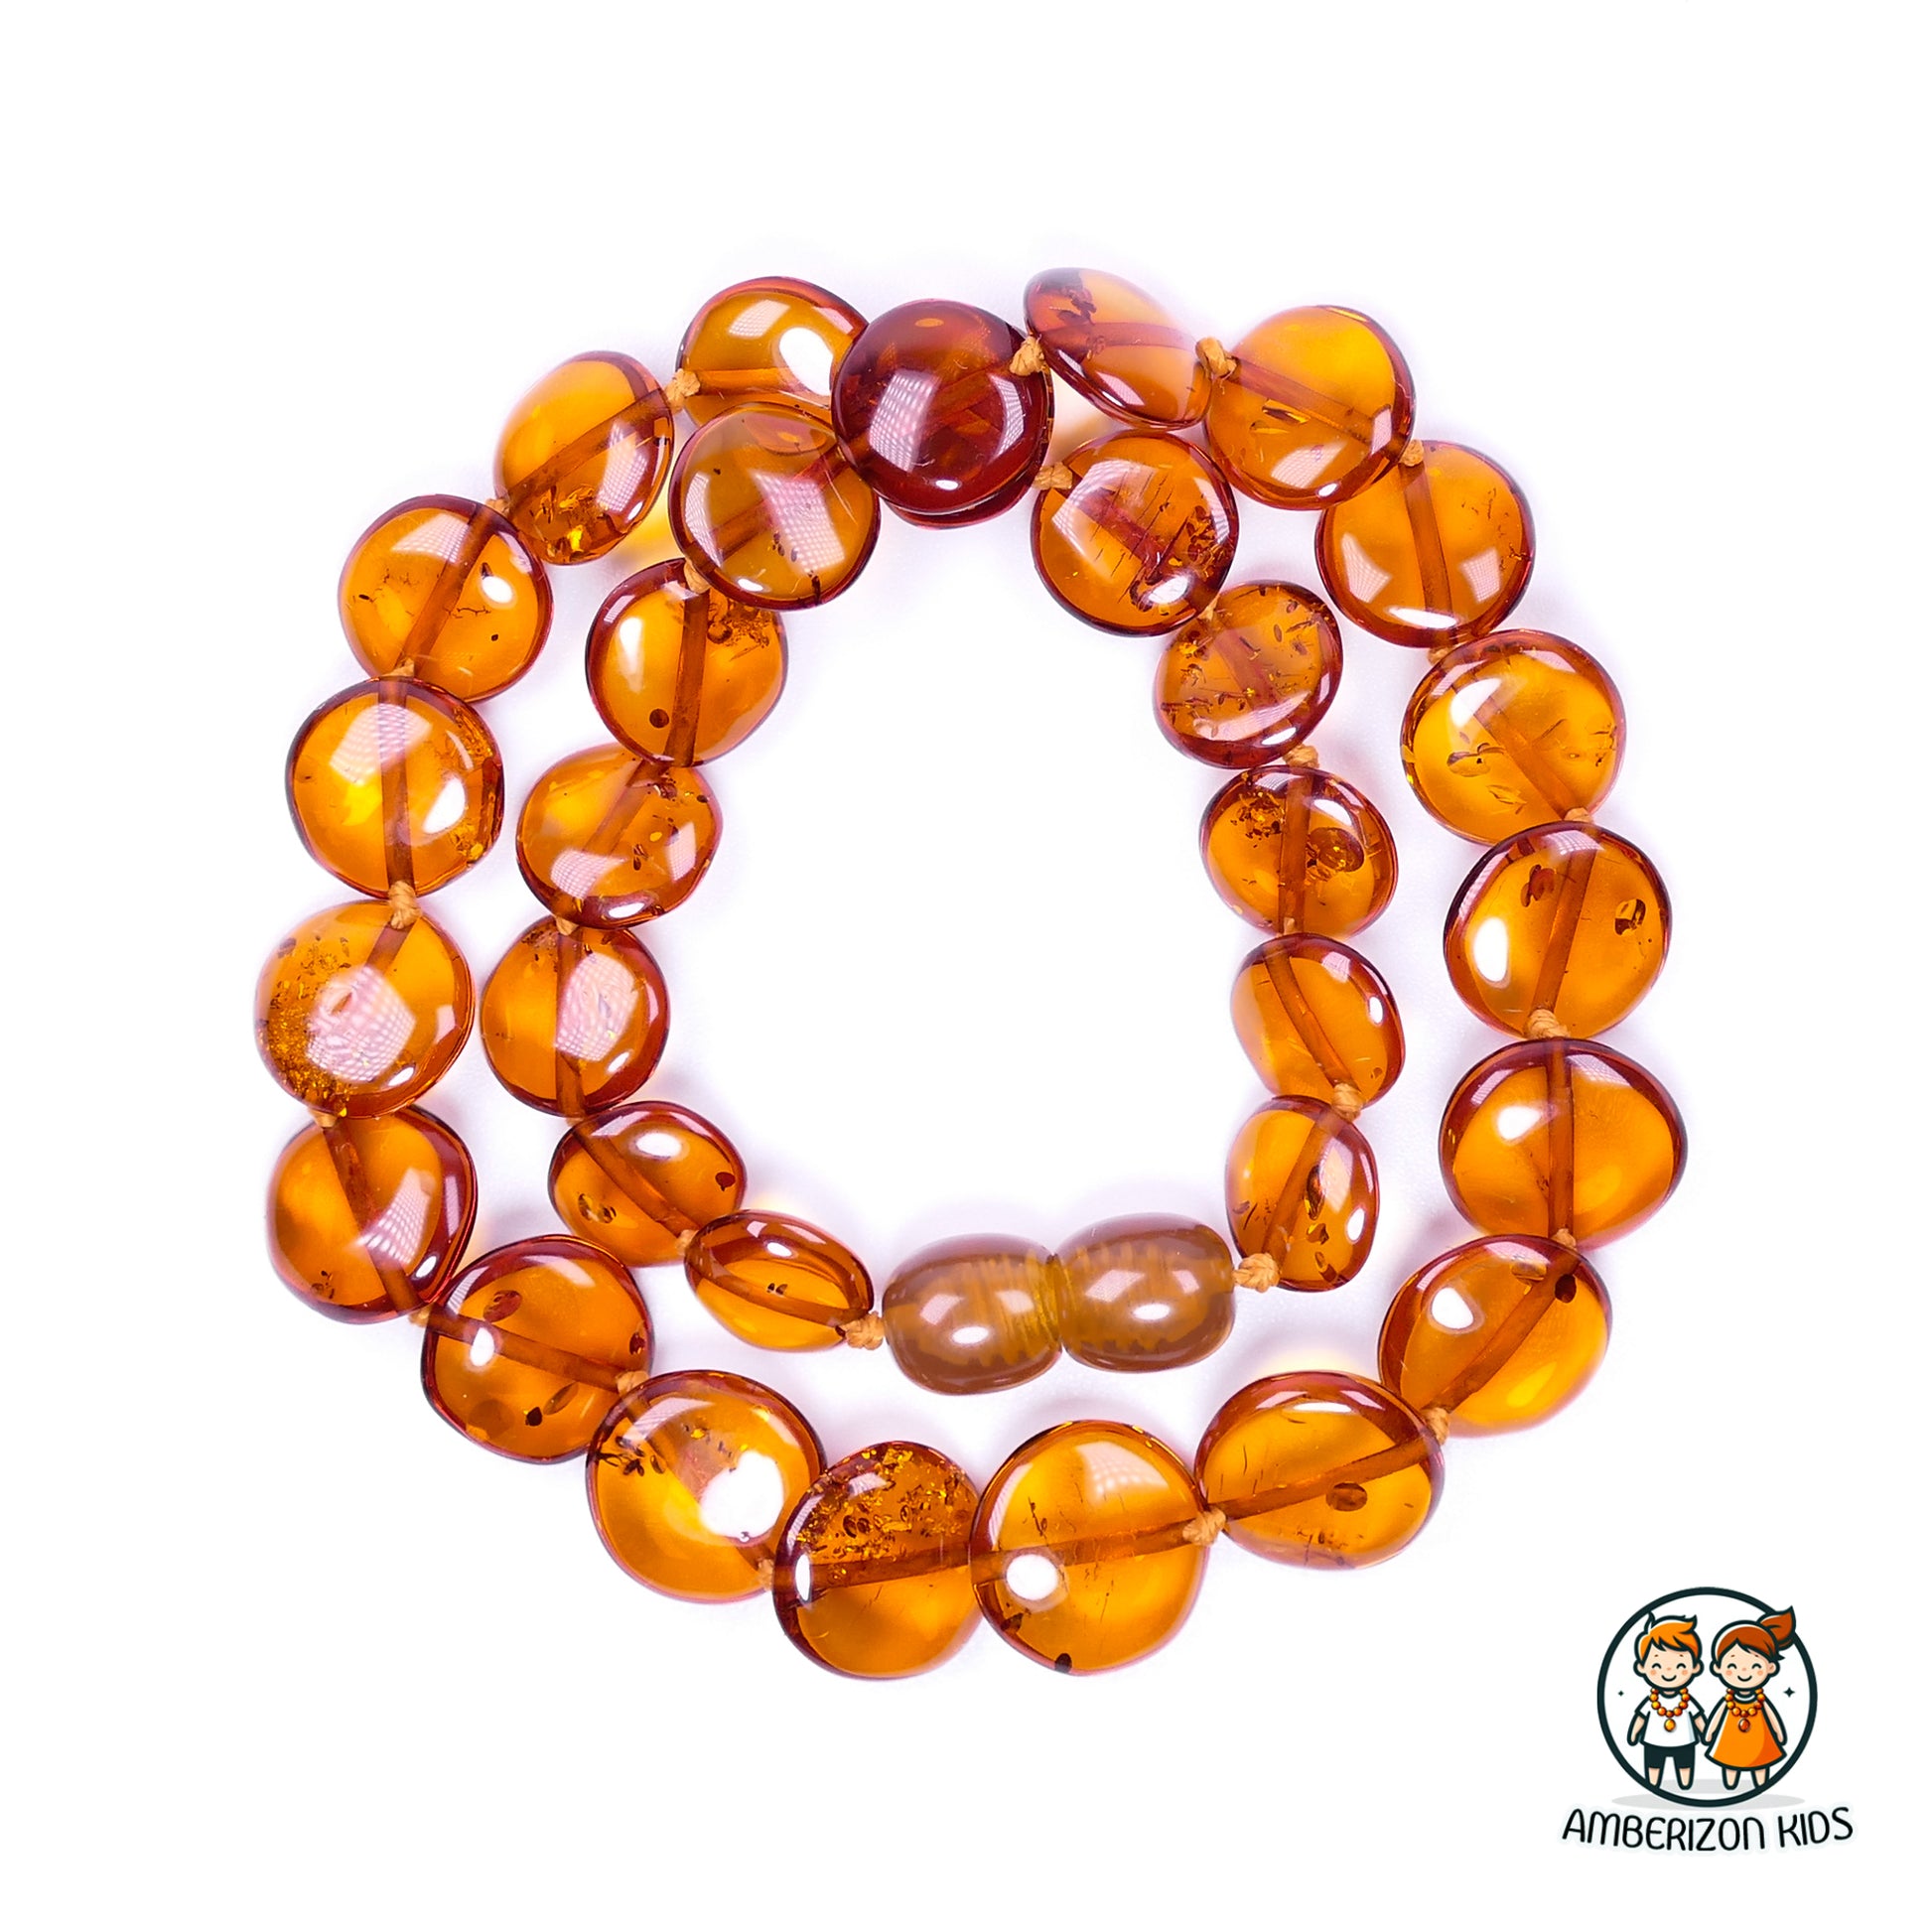 Premium polished Baltic amber baby necklace - Translucent tablet shape beads